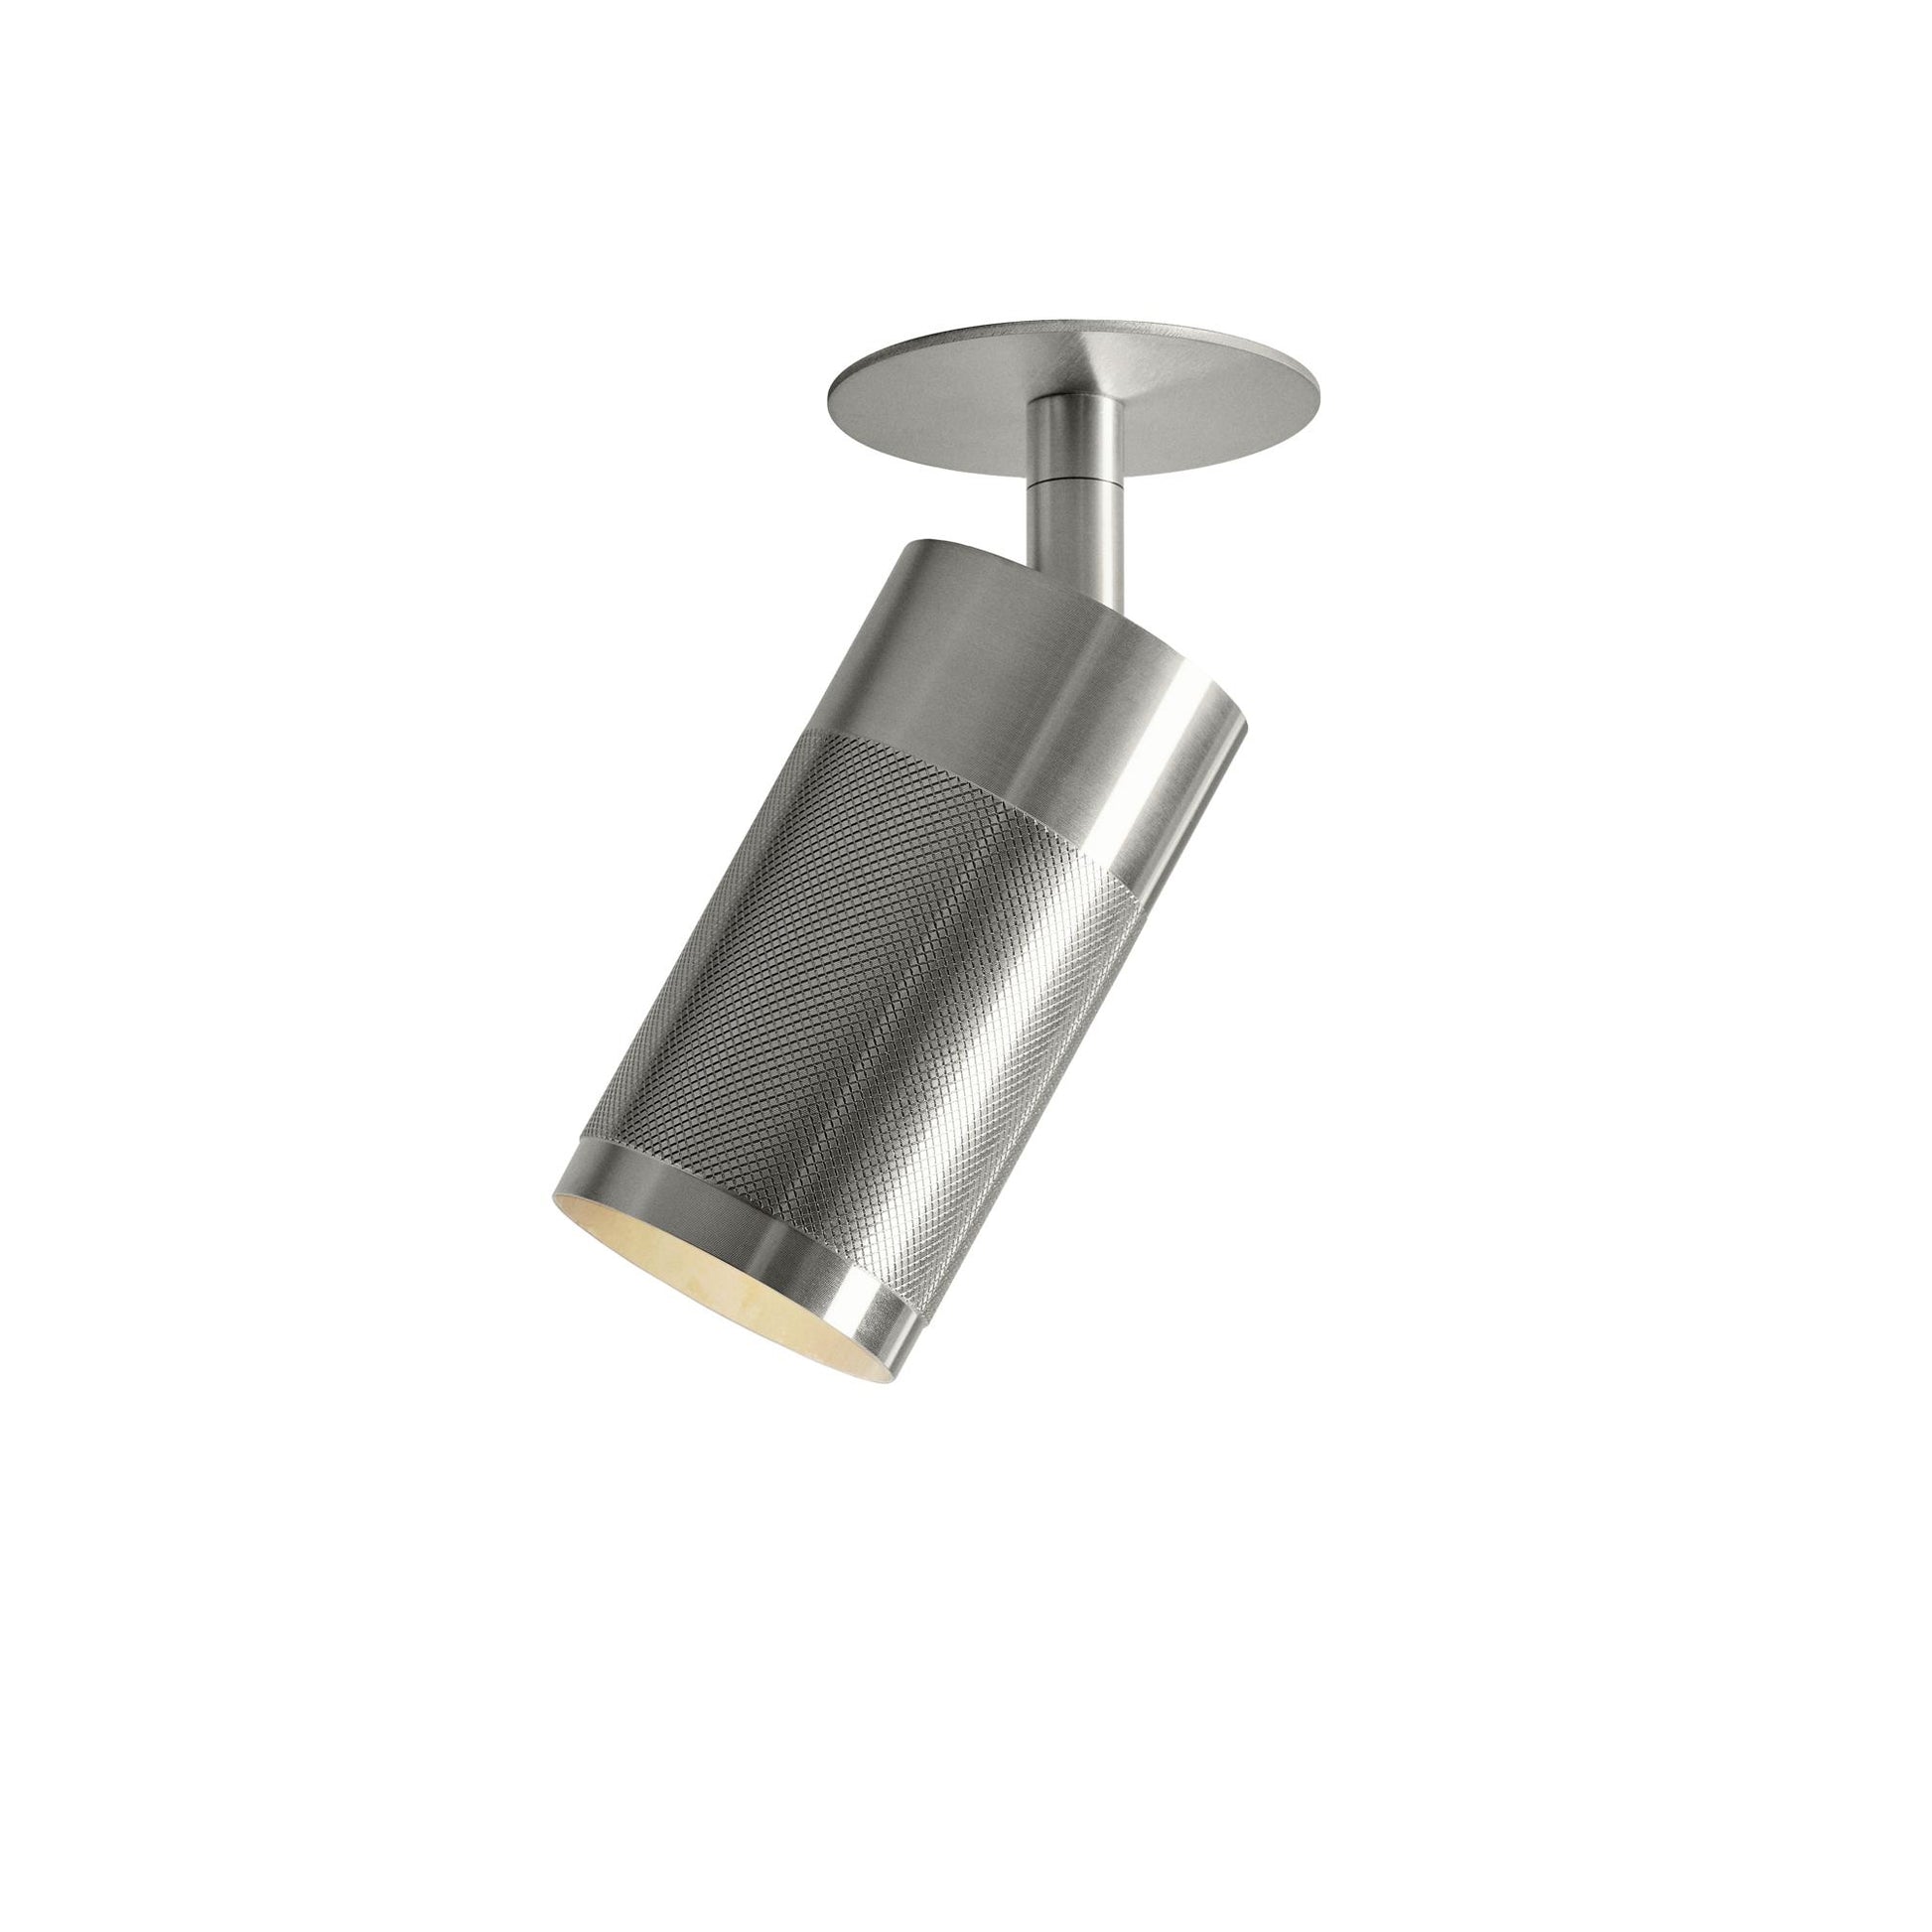 Patrone Recessed Ceiling Light by Thorup Copenhagen #Silver